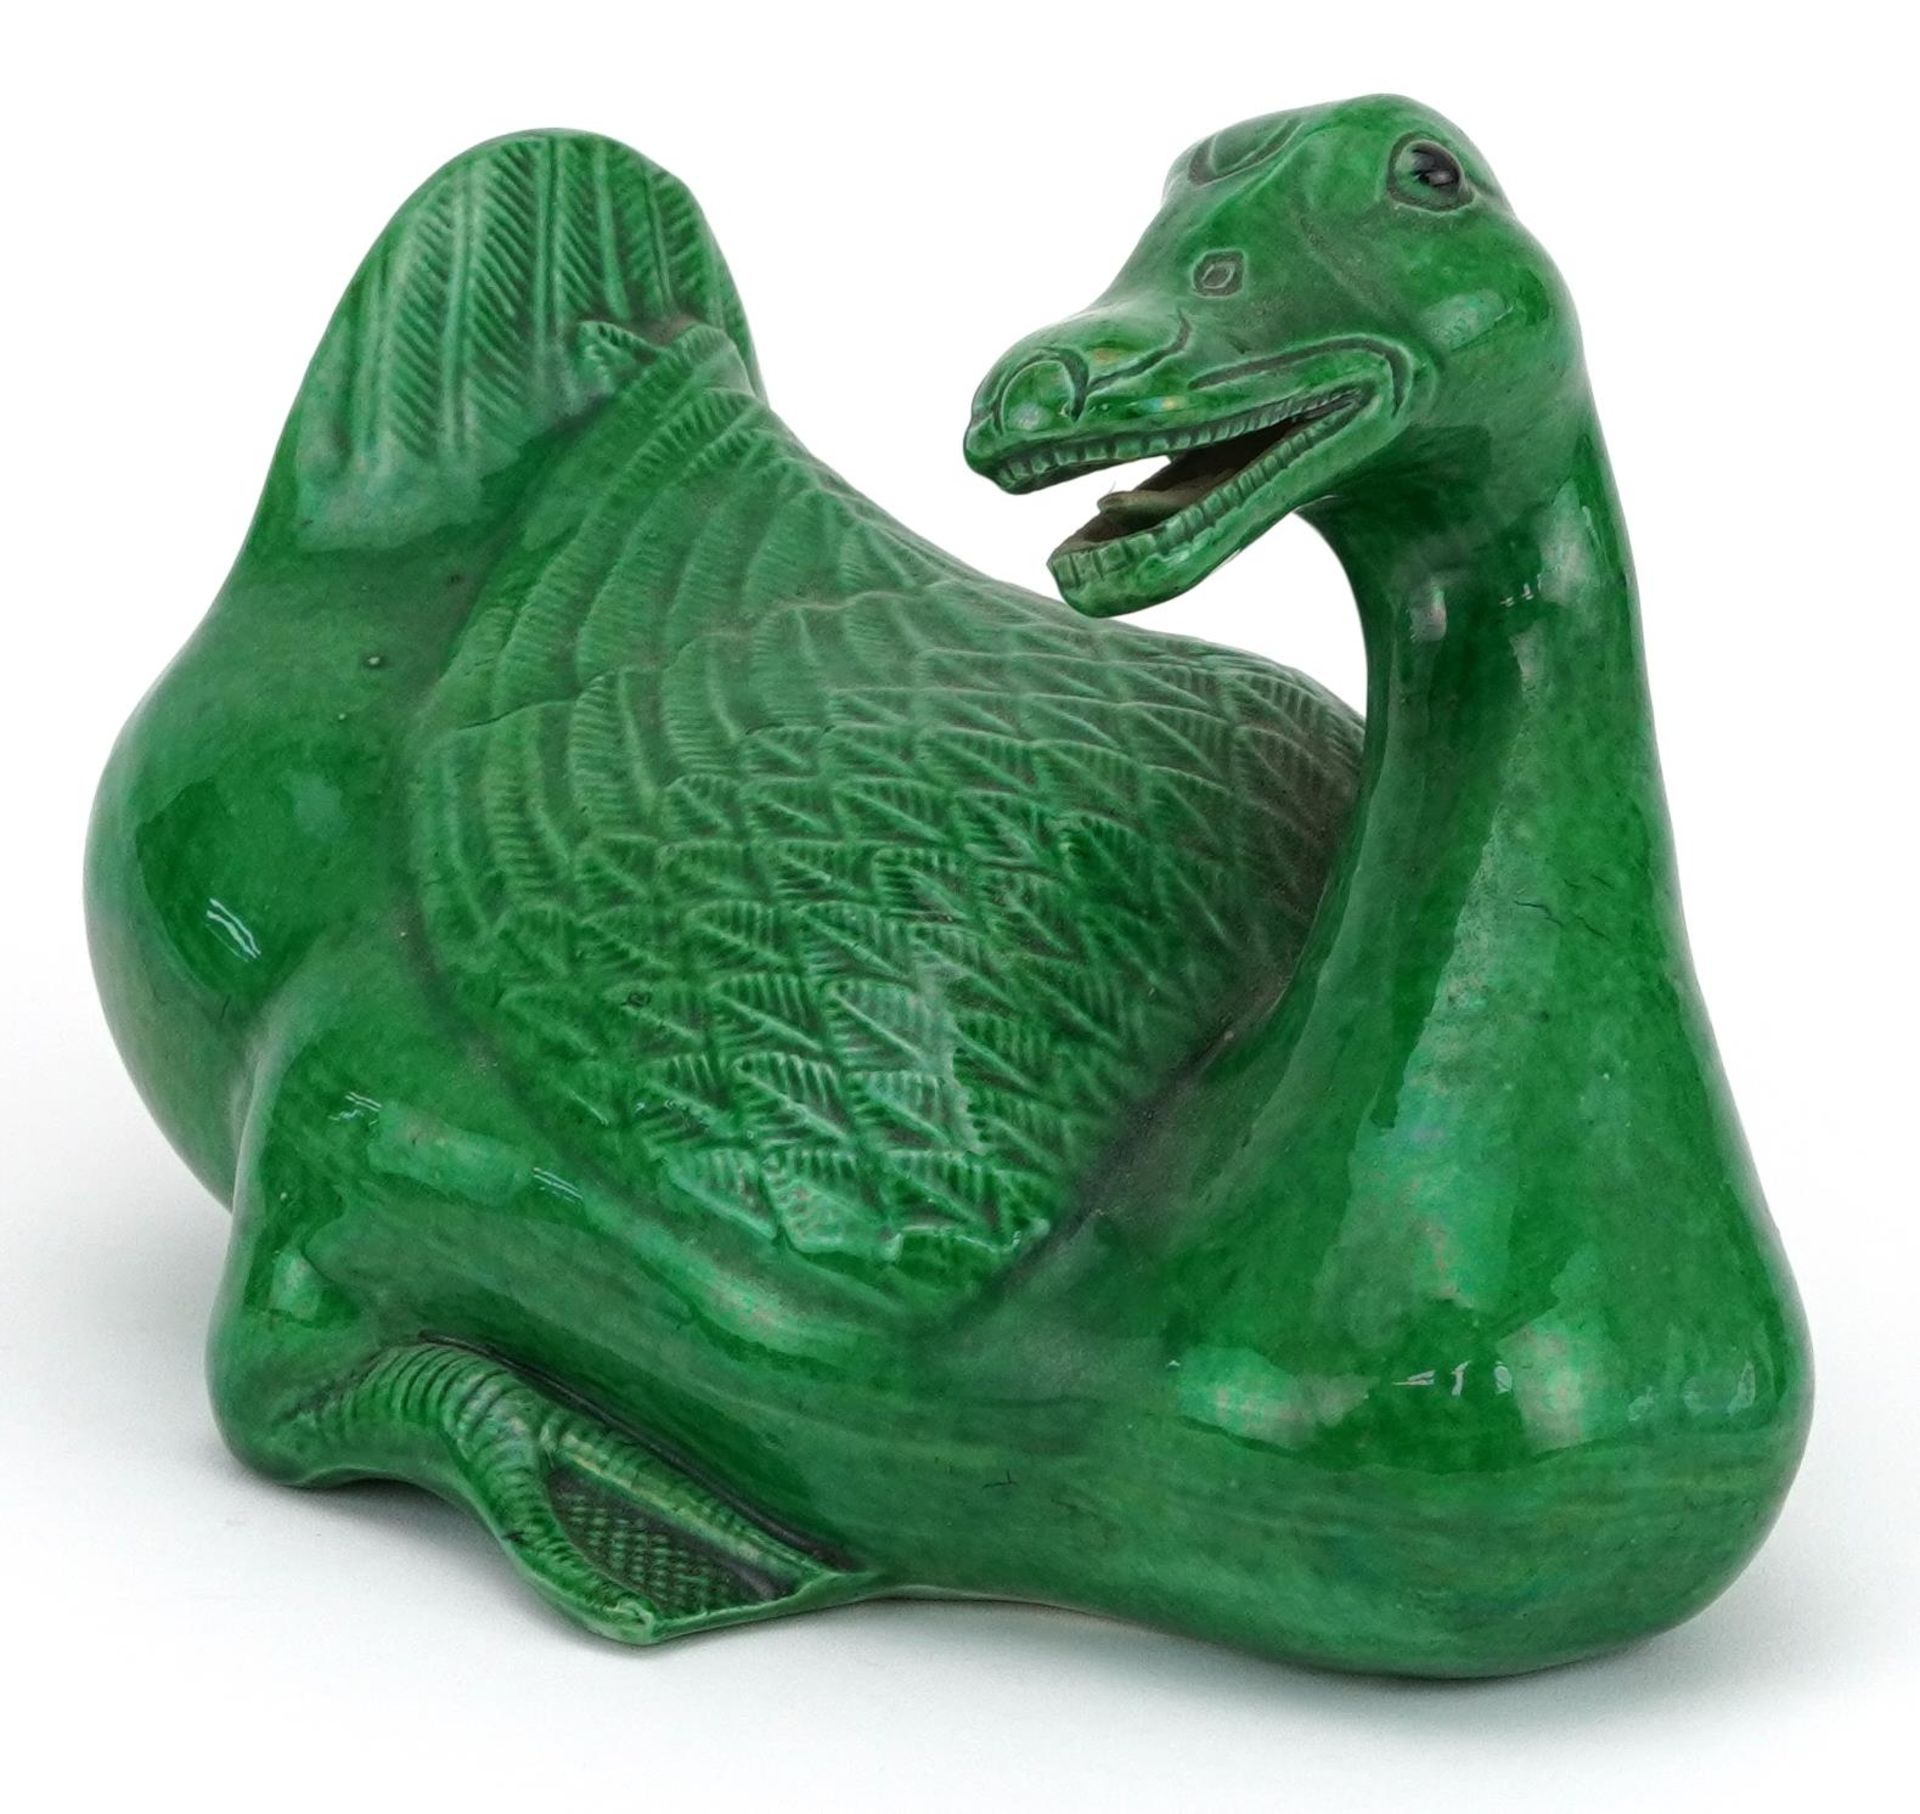 Chinese porcelain Mandarin duck having a green glaze, 18cm in length : For further information on